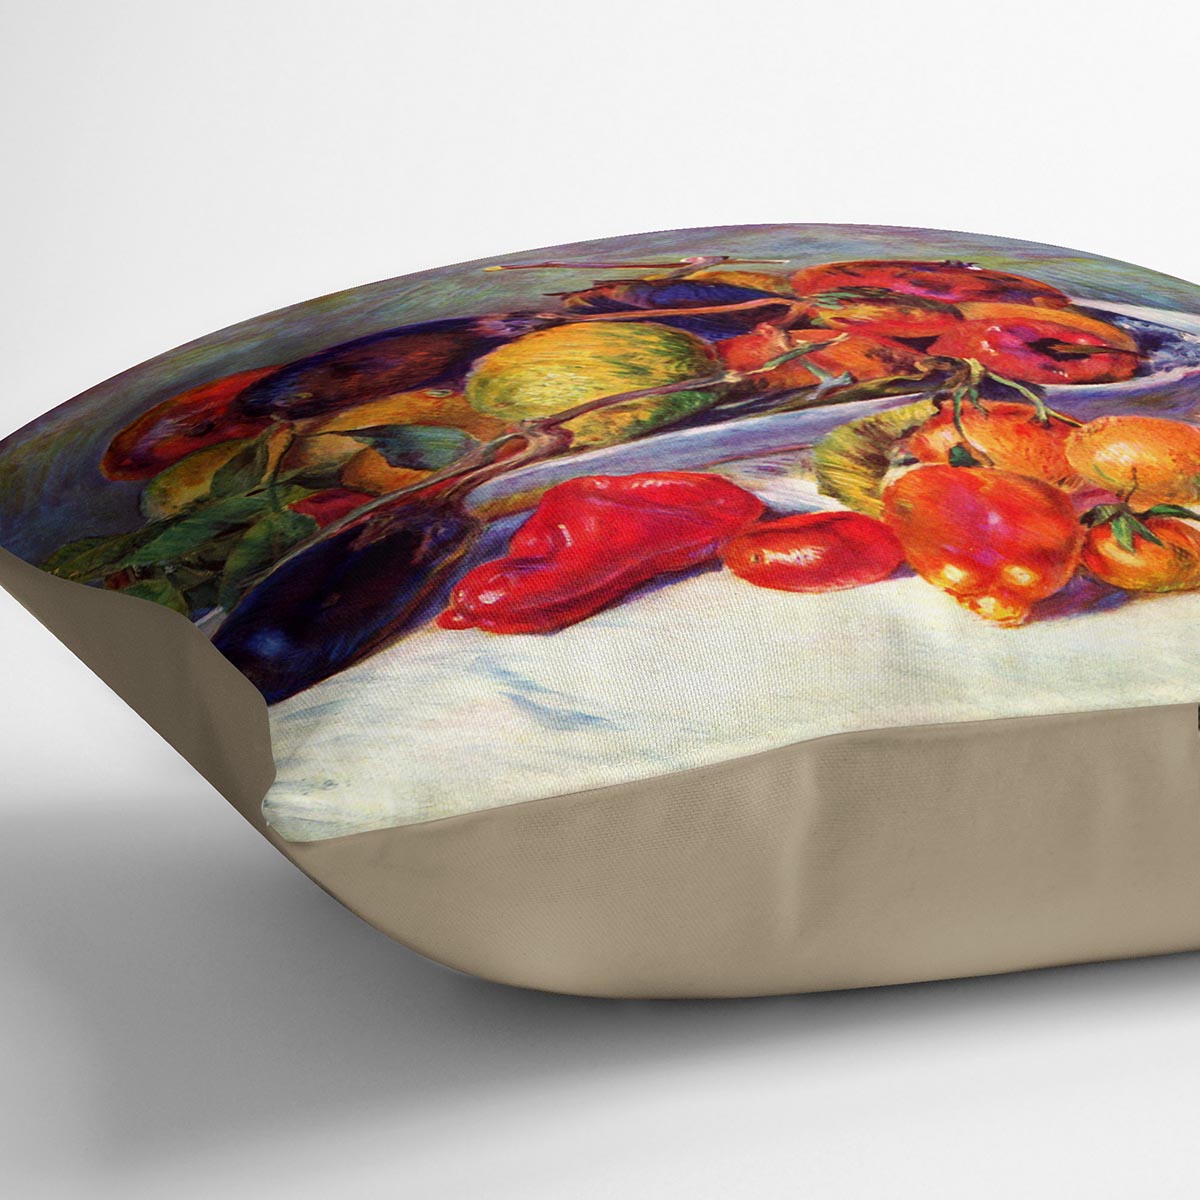 Still life with tropical fruits by Renoir Cushion